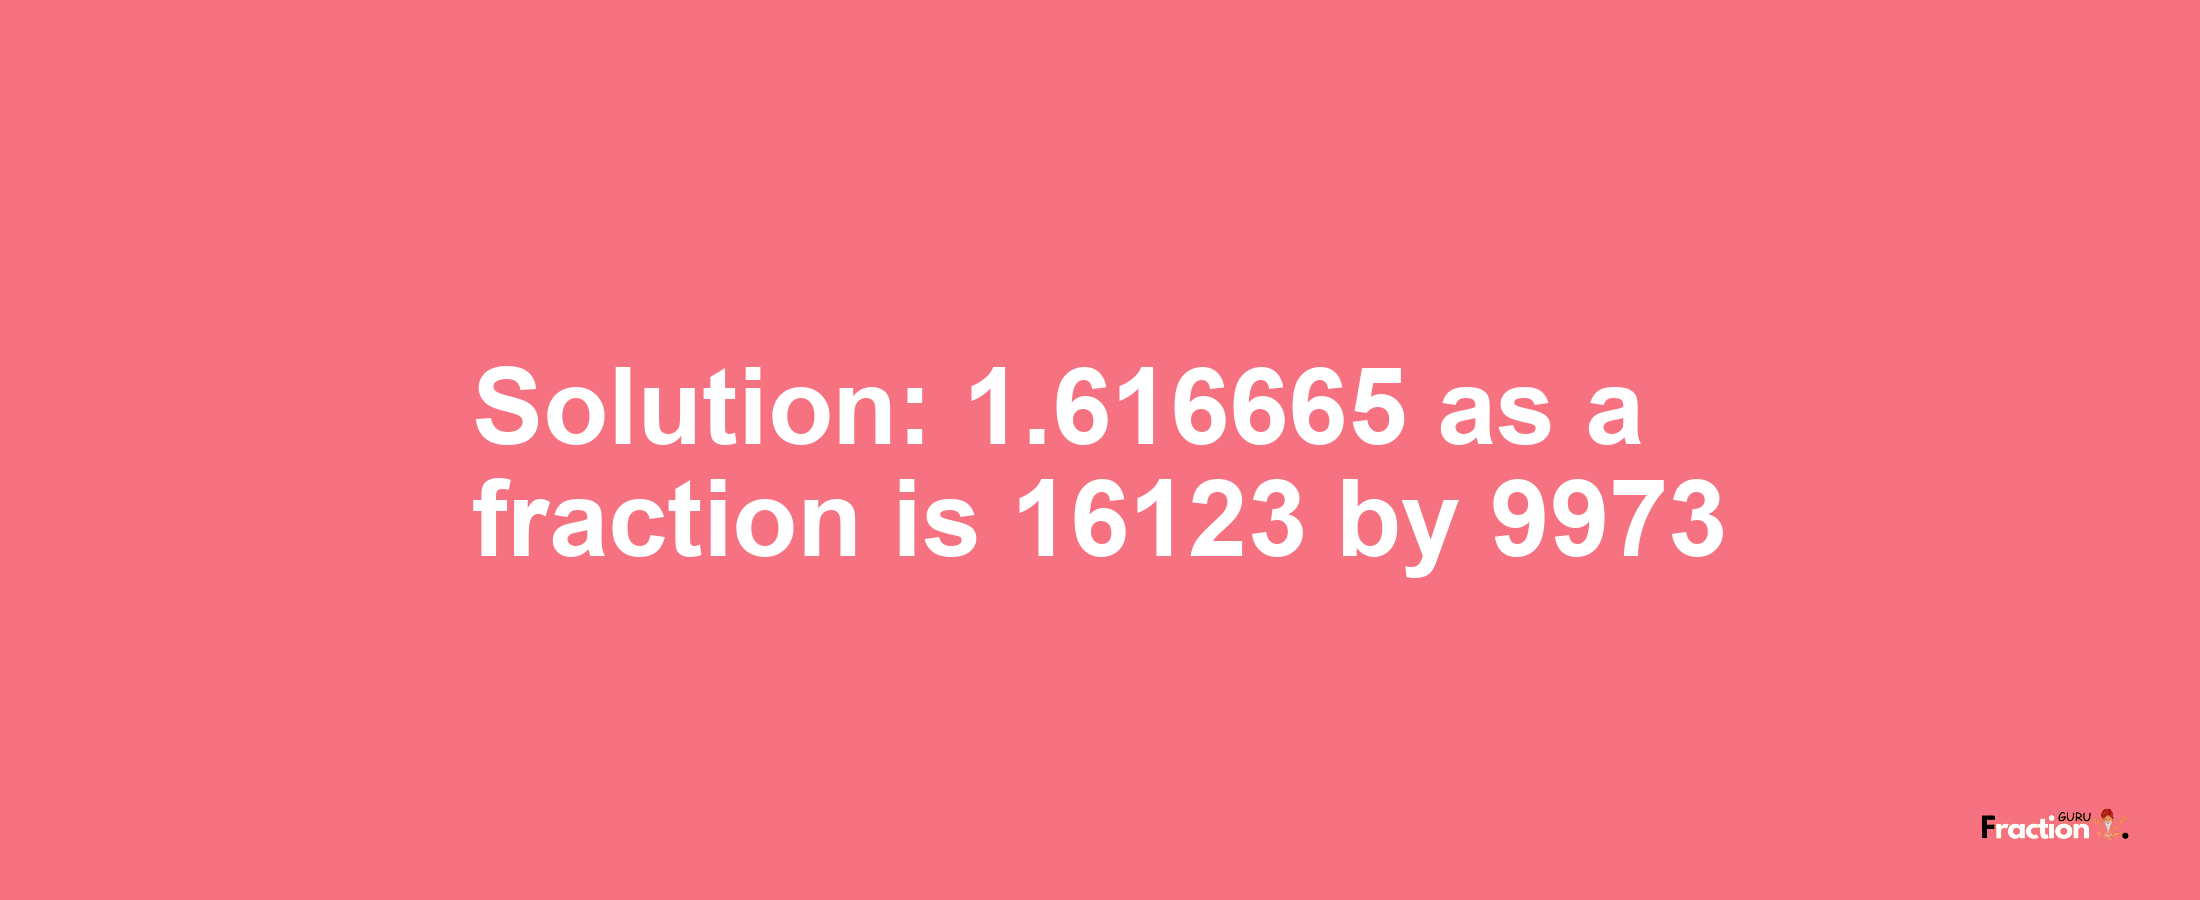 Solution:1.616665 as a fraction is 16123/9973